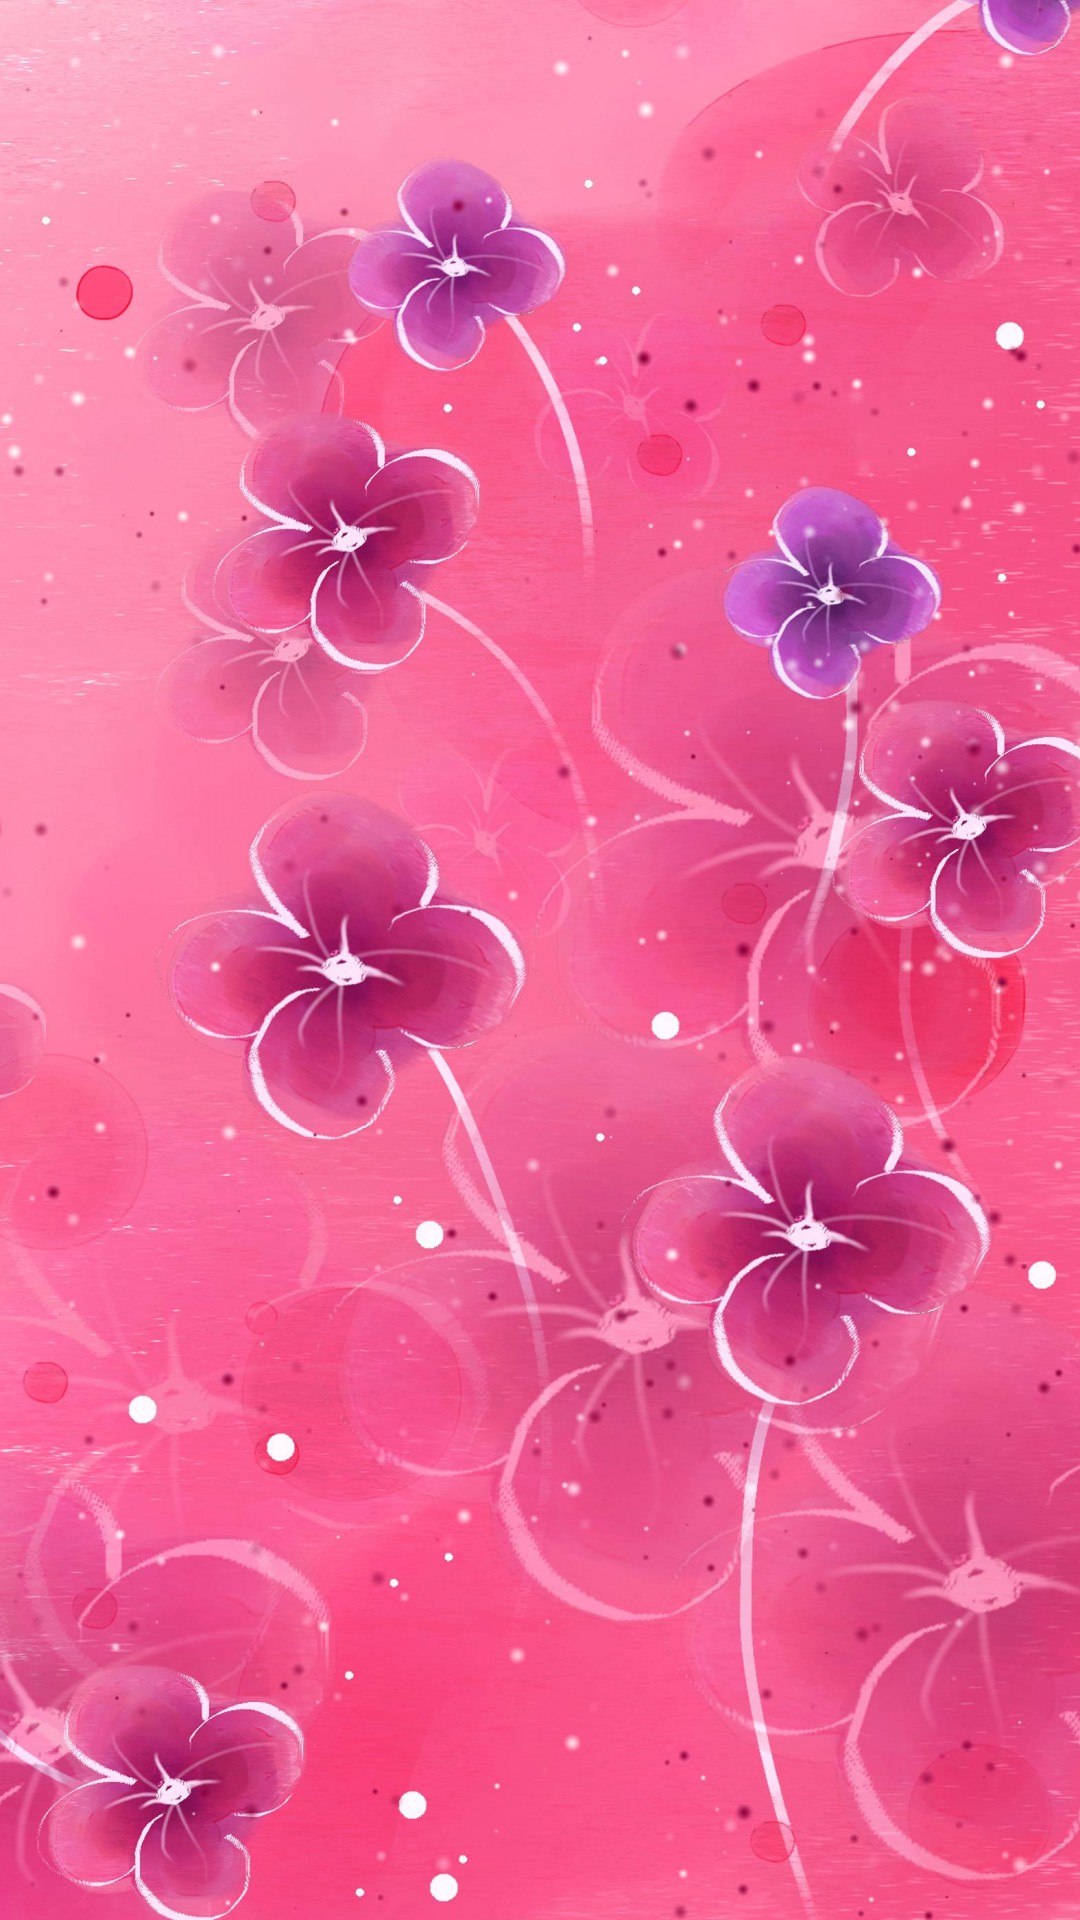 Iphone Pretty Pink Flowers Wallpaper - Images Gallery